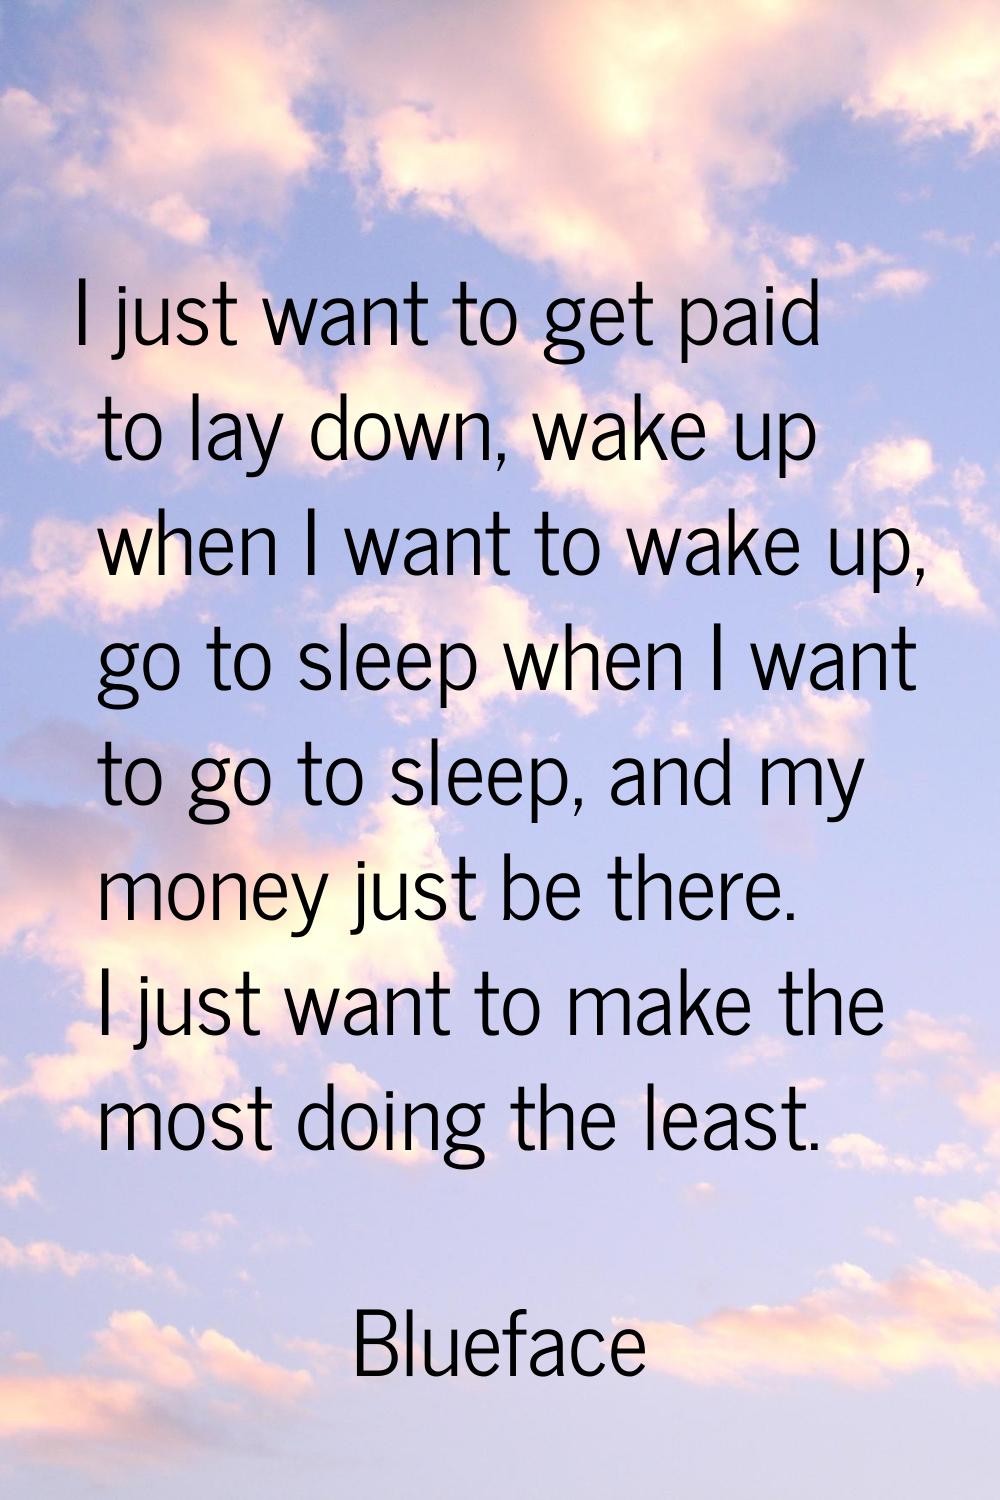 I just want to get paid to lay down, wake up when I want to wake up, go to sleep when I want to go 